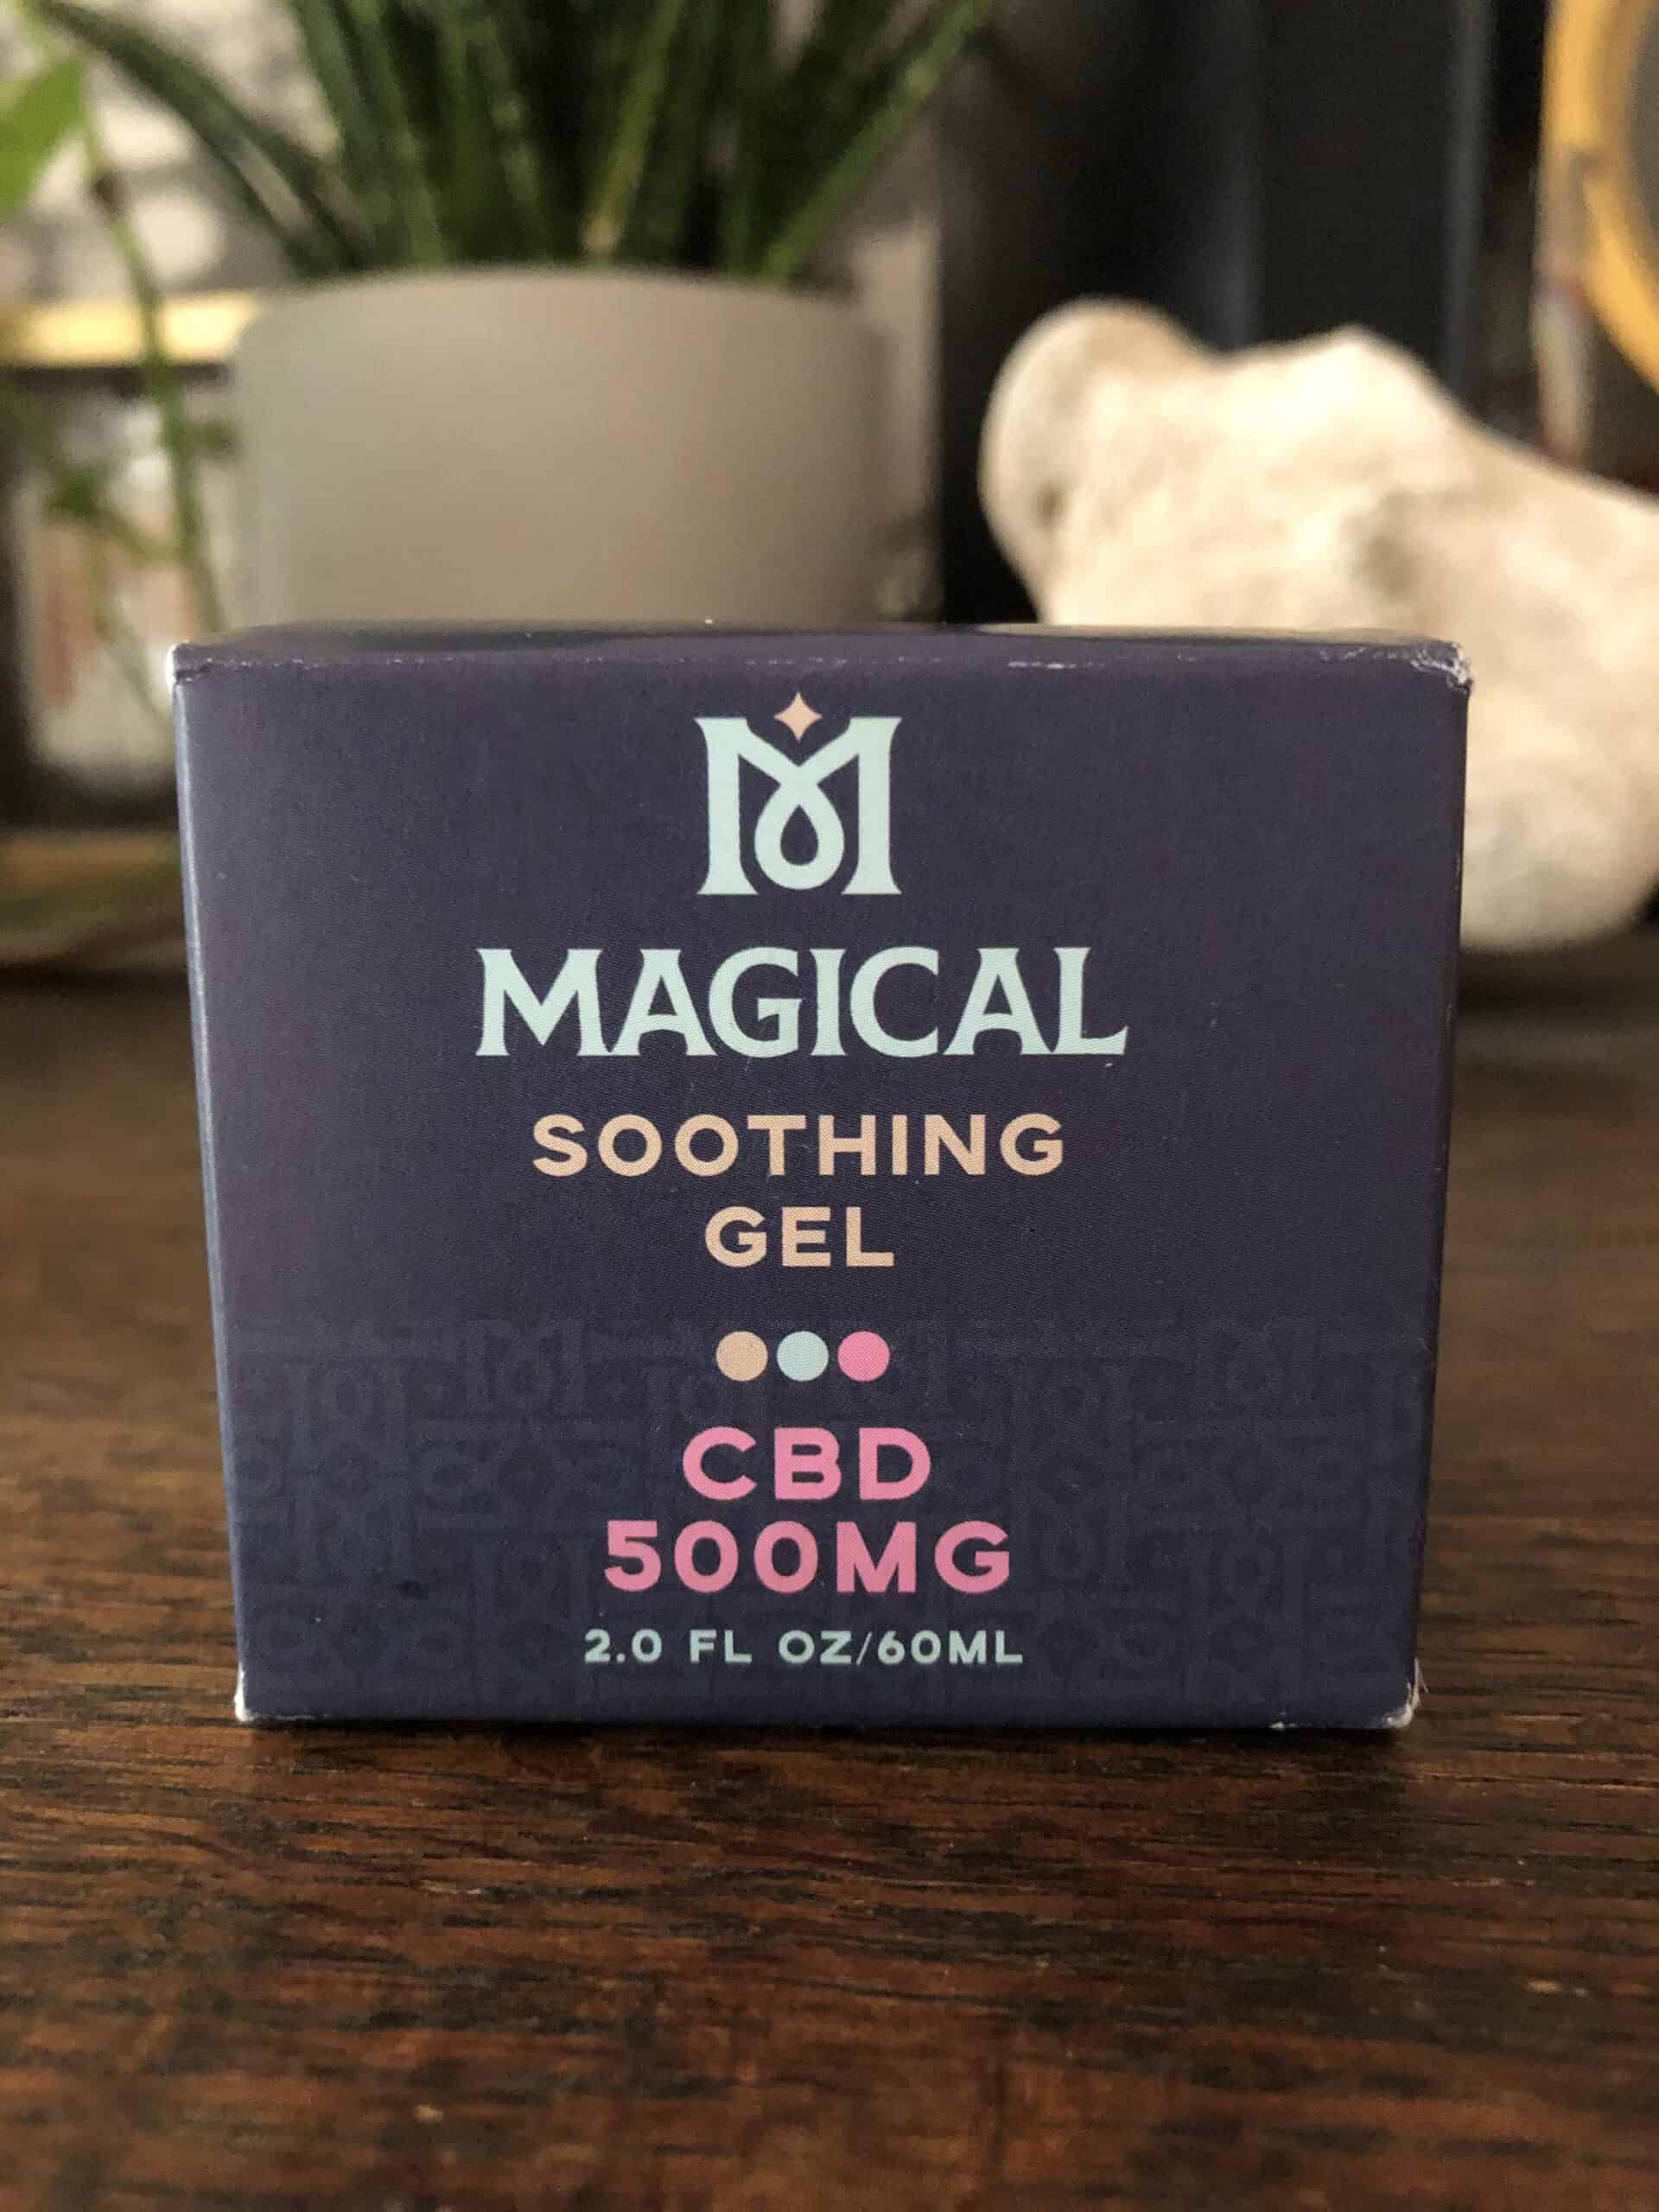 Magical CBD Soothing Gel Save On Cannabis Review